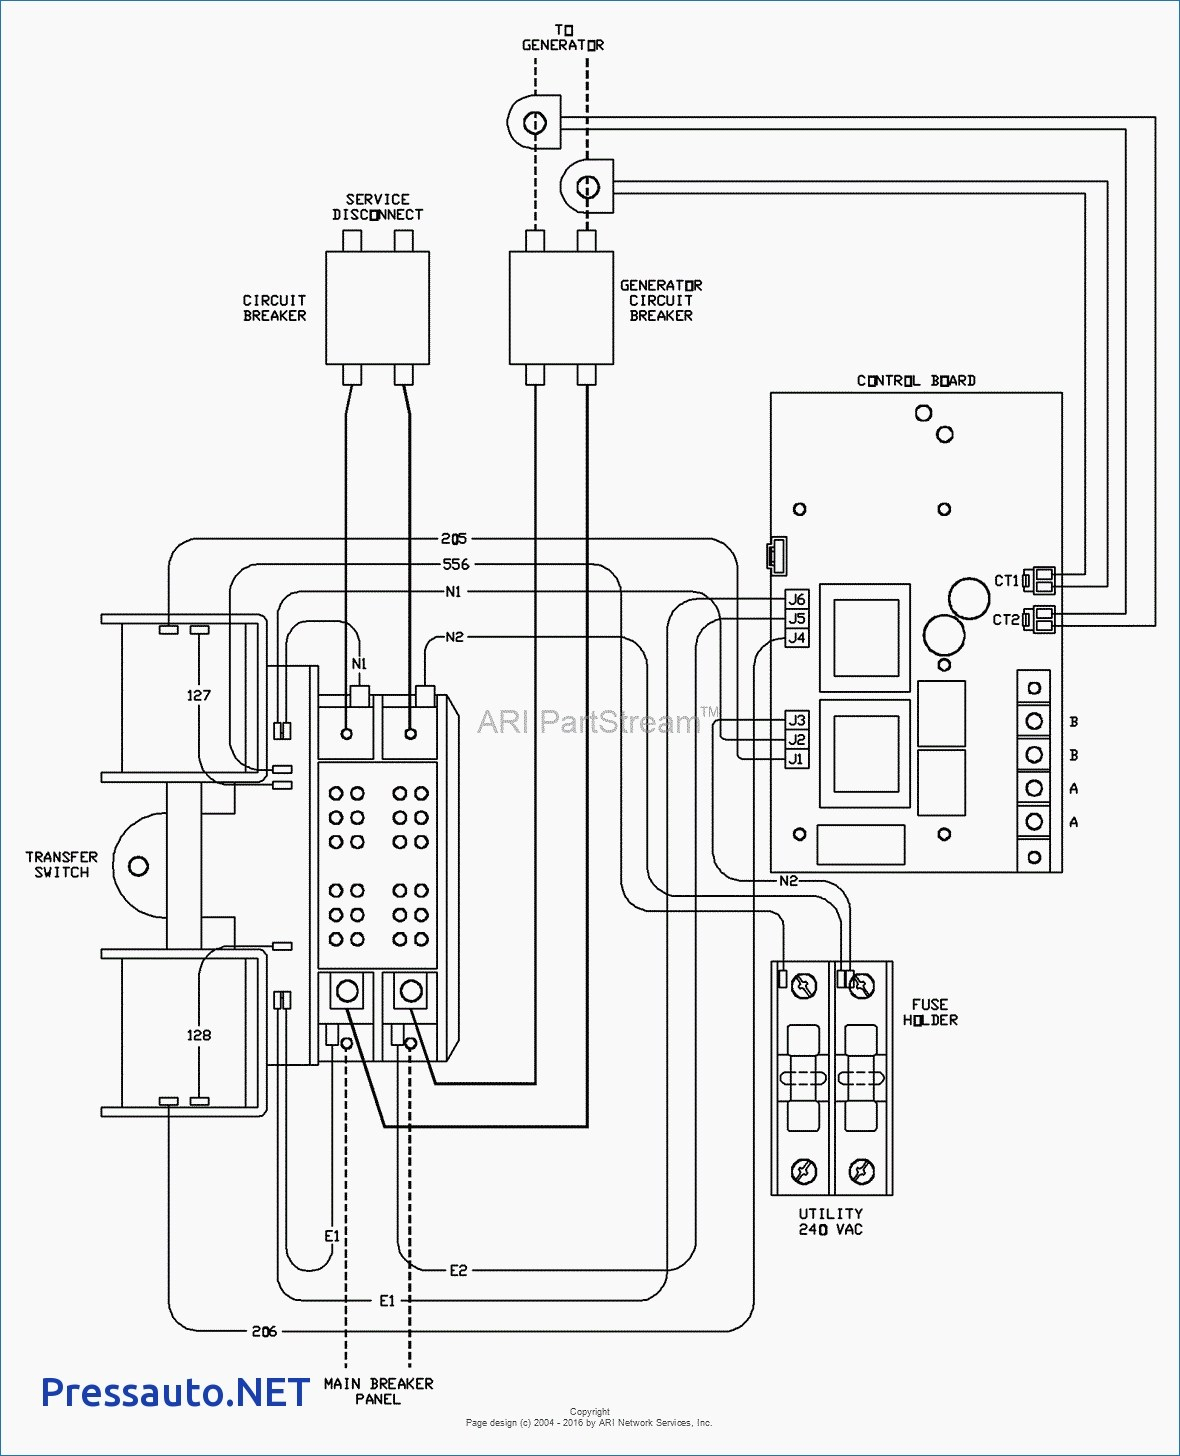 Wiring Diagram For Reliance Transfer Switch - Wiring Diagram Online - Reliance Generator Transfer Switch Wiring Diagram